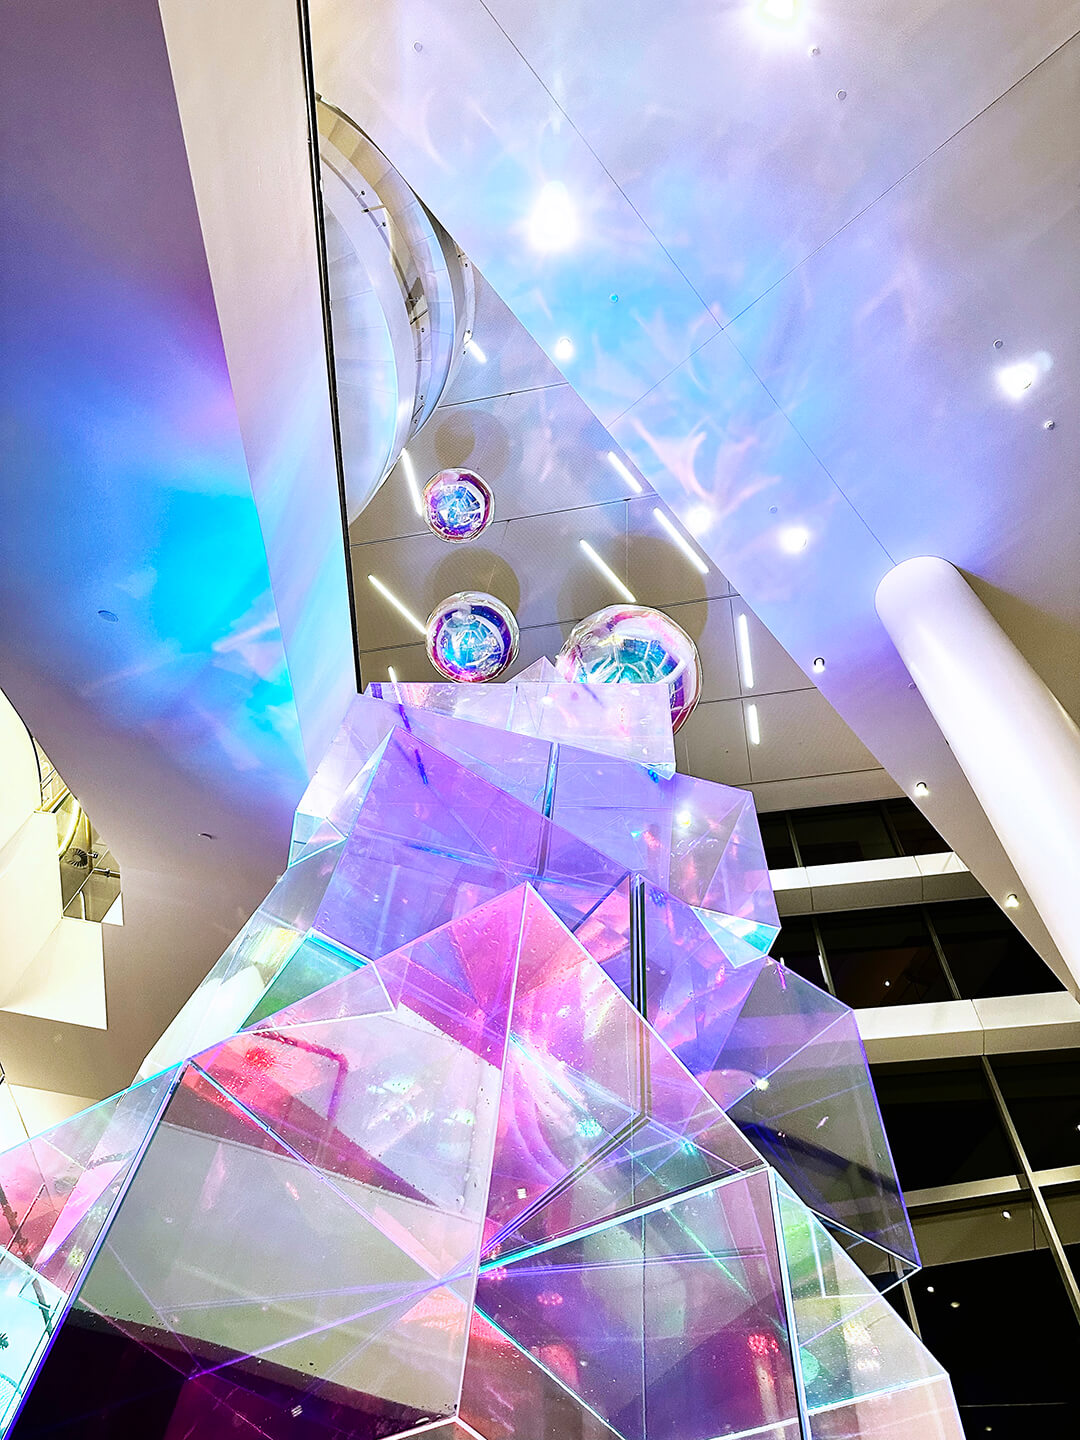 VANDAL Experiential Christmas Campaign for Dexus in the commercial lobby of 50 Bridge Street, Sydney showing dichroic film on escalators and artistic sculpture Christmas tree.